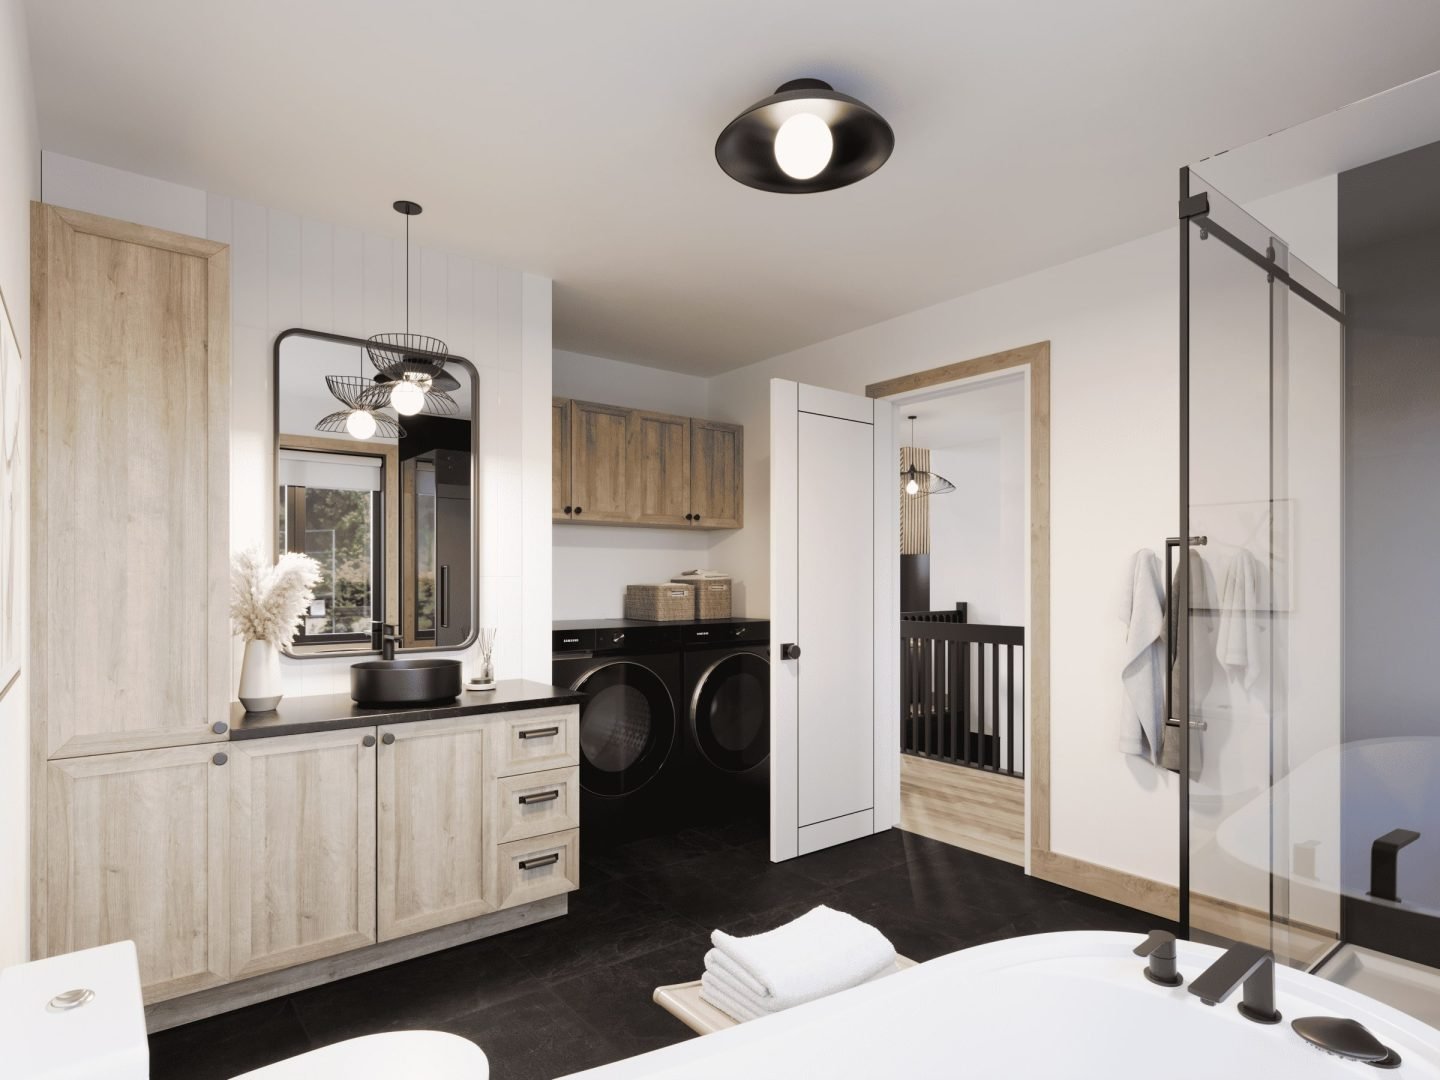 Chalet model called Horizon. Contemporary styling from the bathroom.